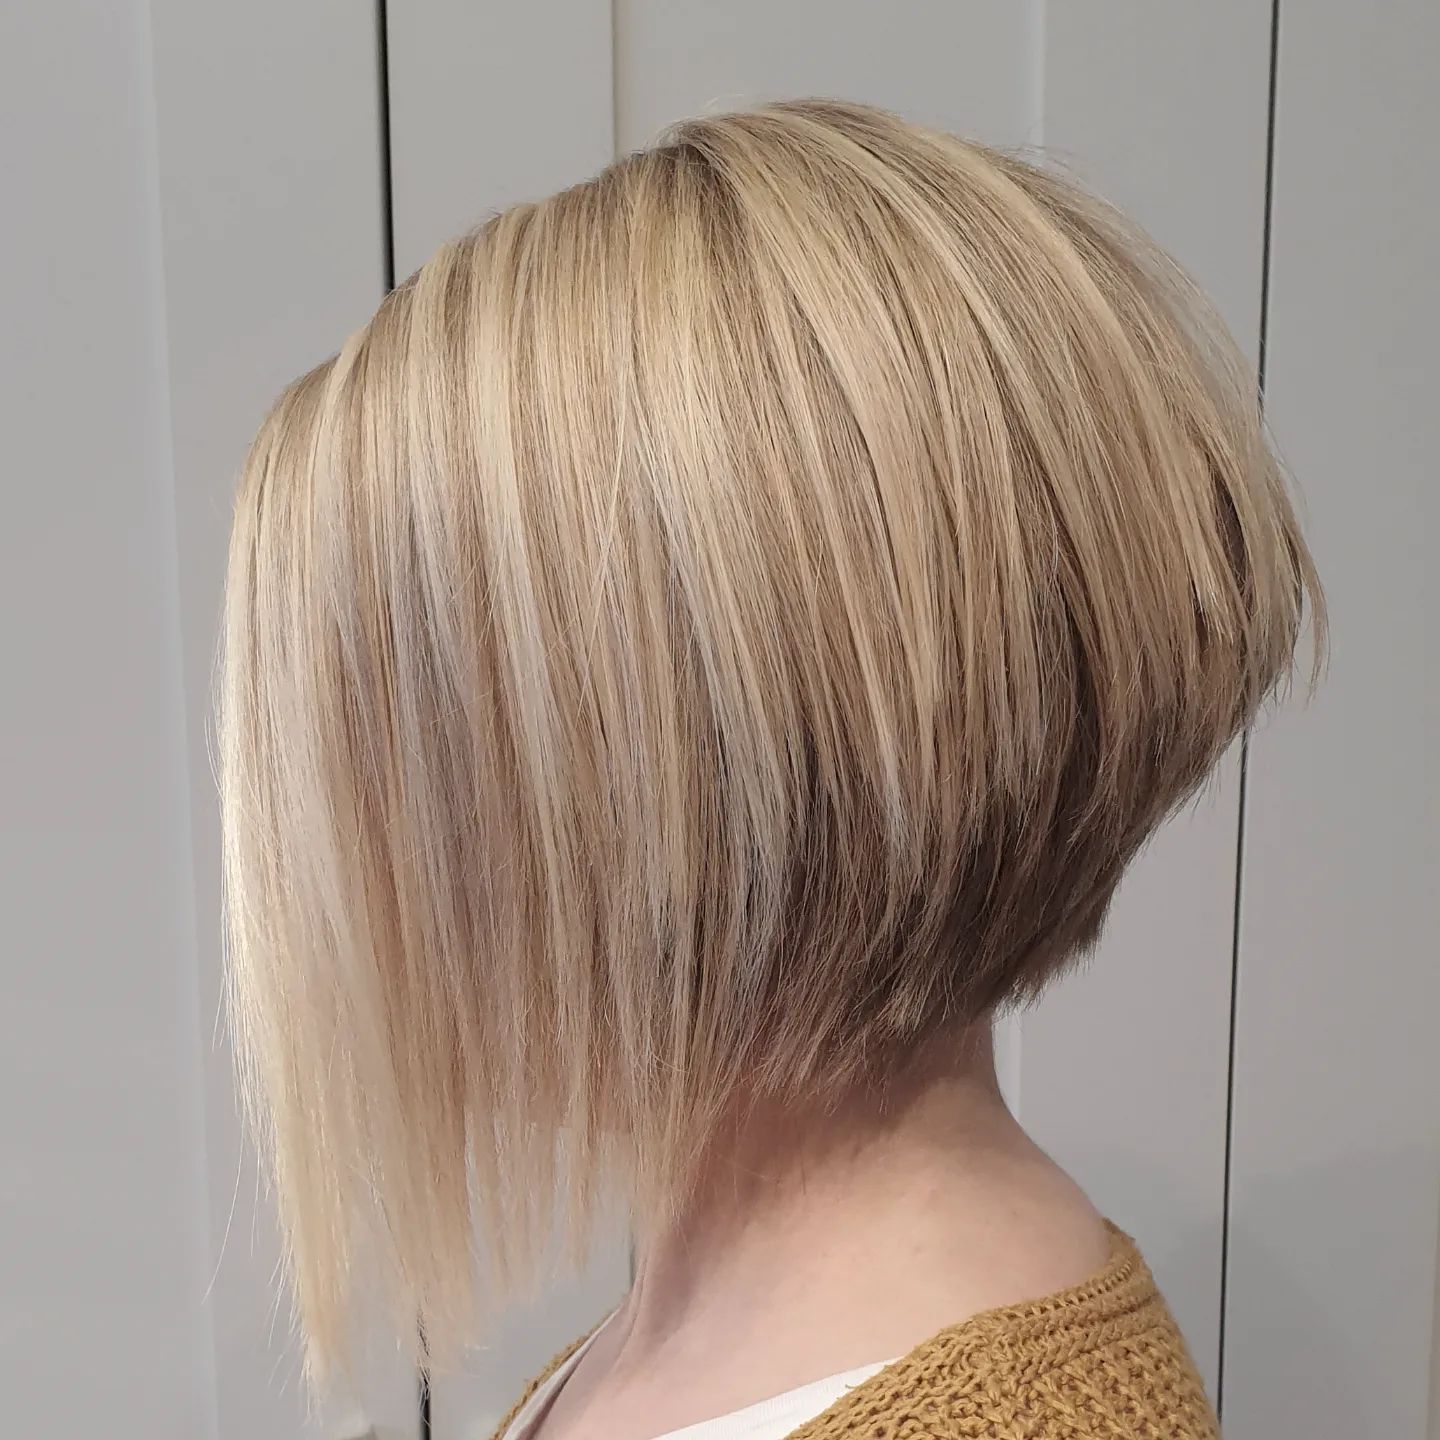 Stacked Bob 76 Long stacked bob | Medium length stacked bob | Pictures of stacked bob haircuts front and back Stacked Bob Hairstyles for Women